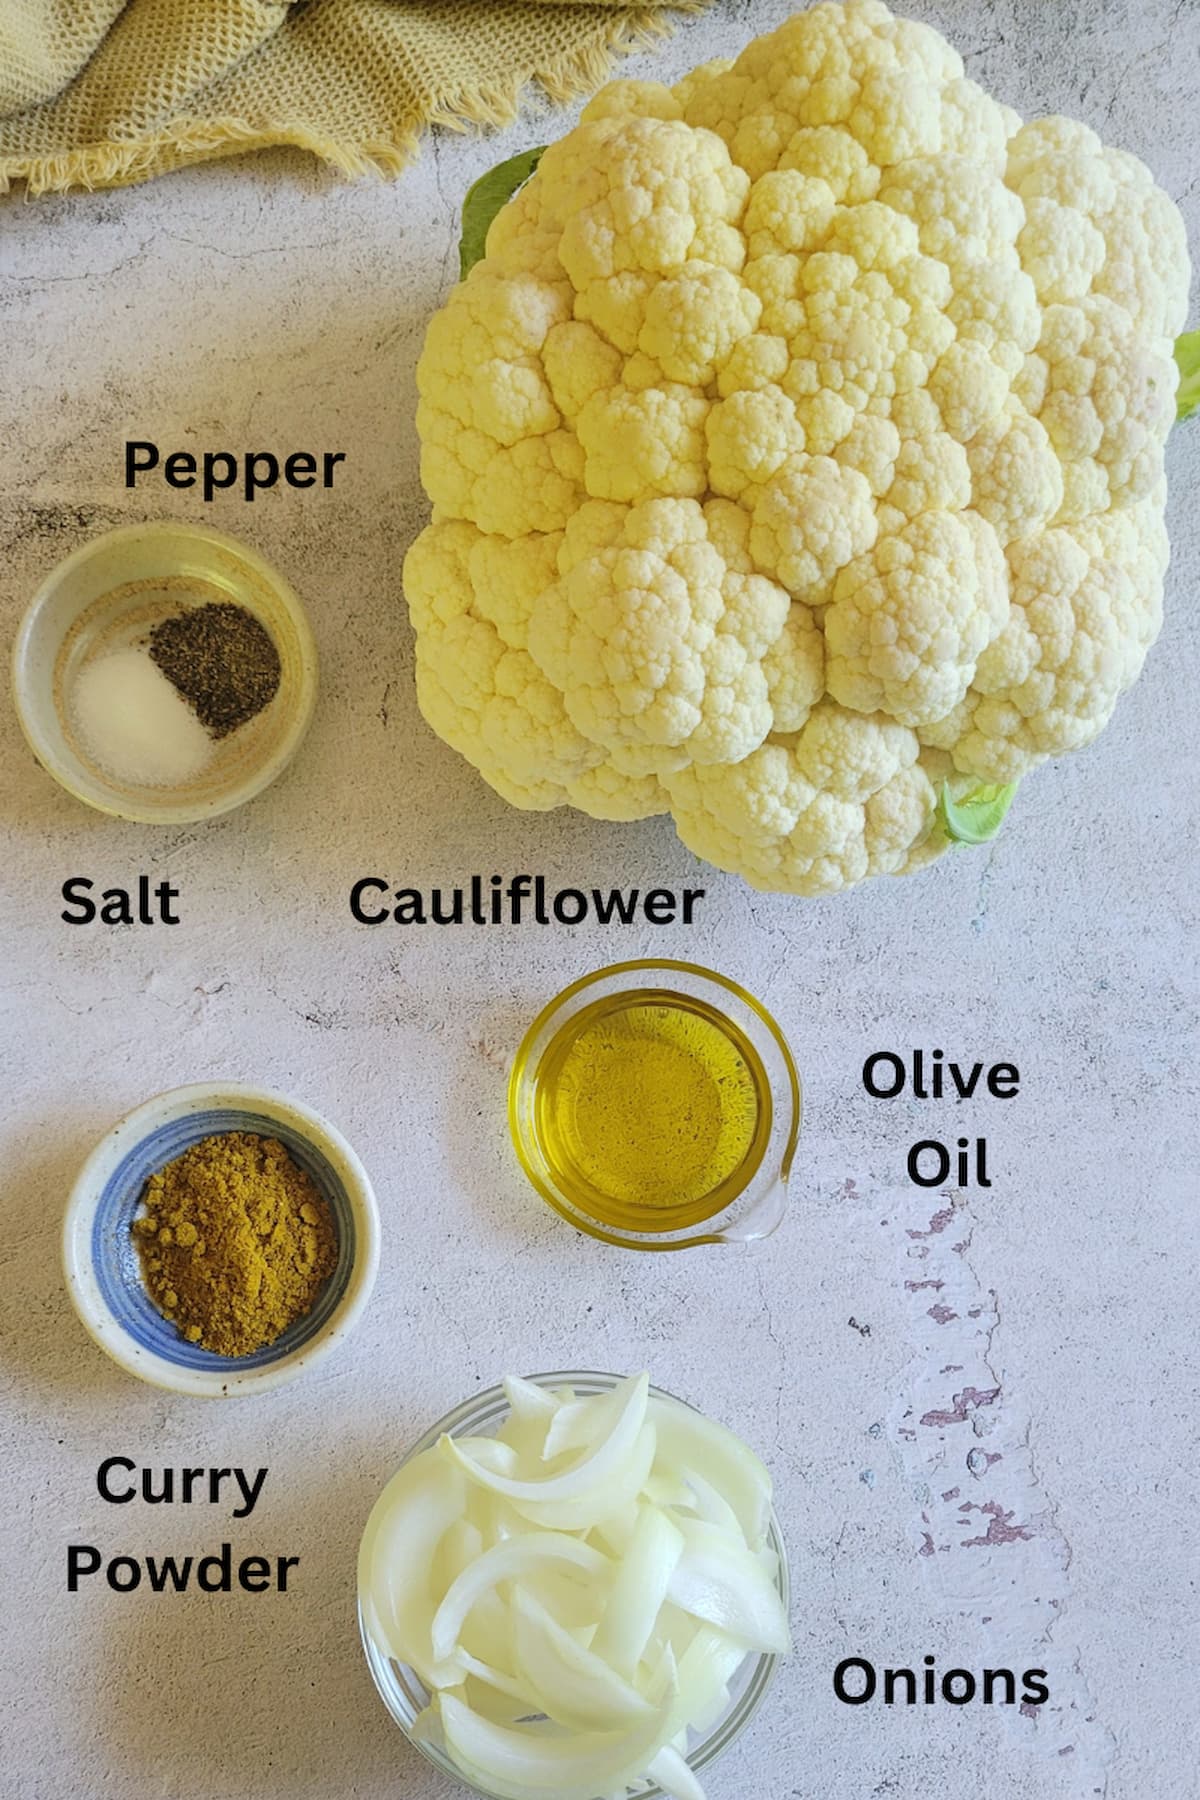 ingredients for cauliflower with curry - cauliflower, onions, curry powder, olive oil, salt and pepper